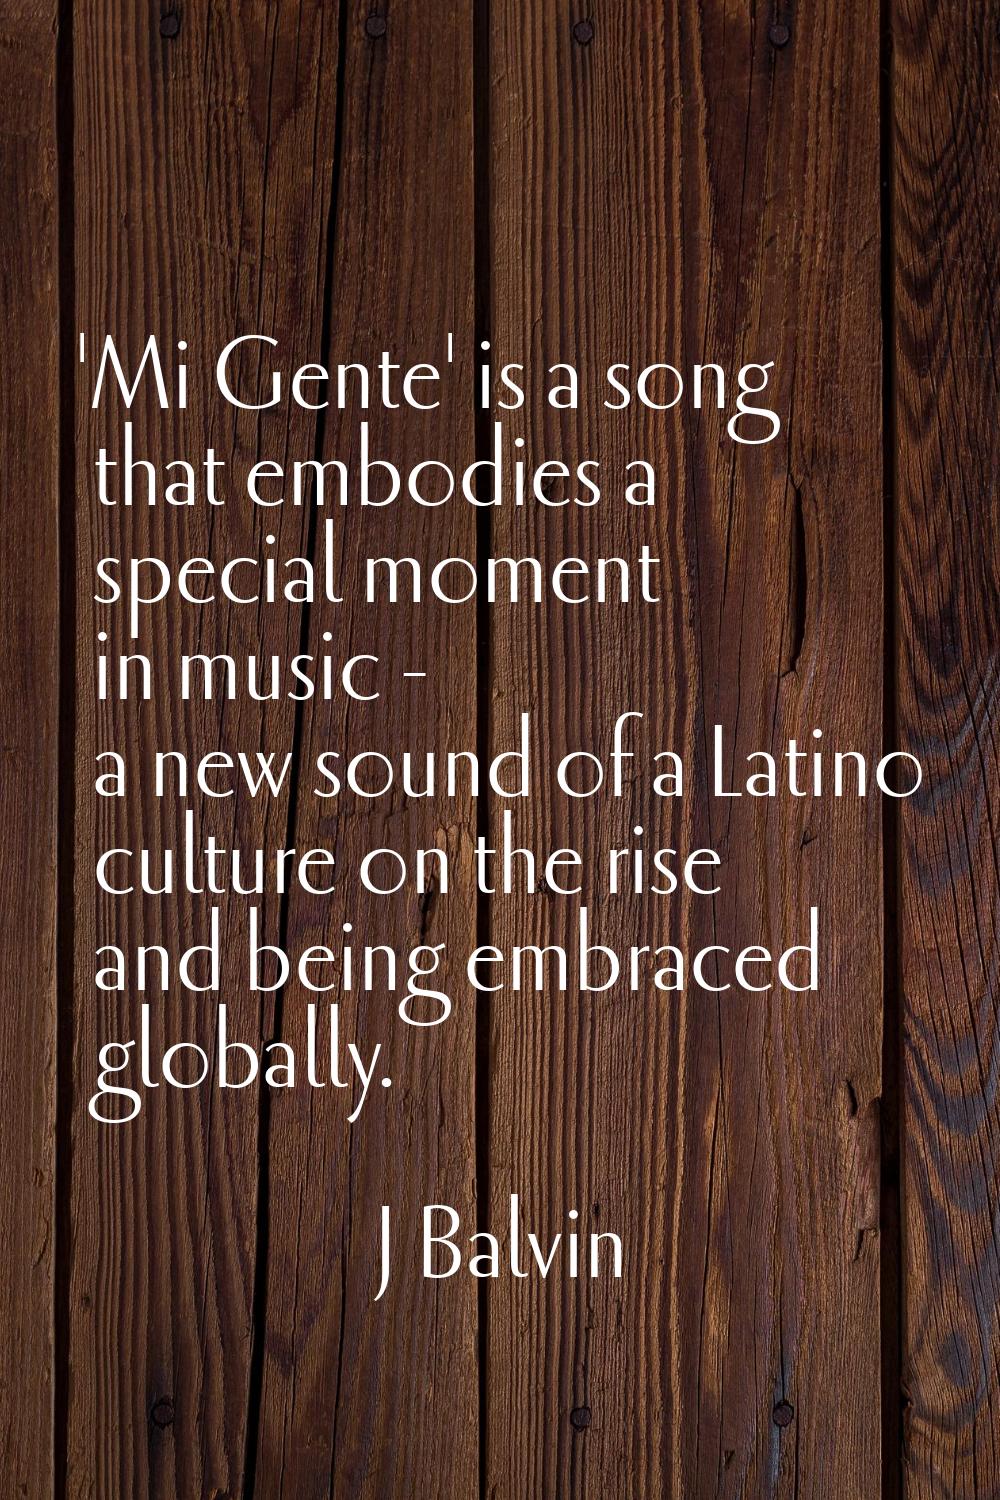 'Mi Gente' is a song that embodies a special moment in music - a new sound of a Latino culture on t